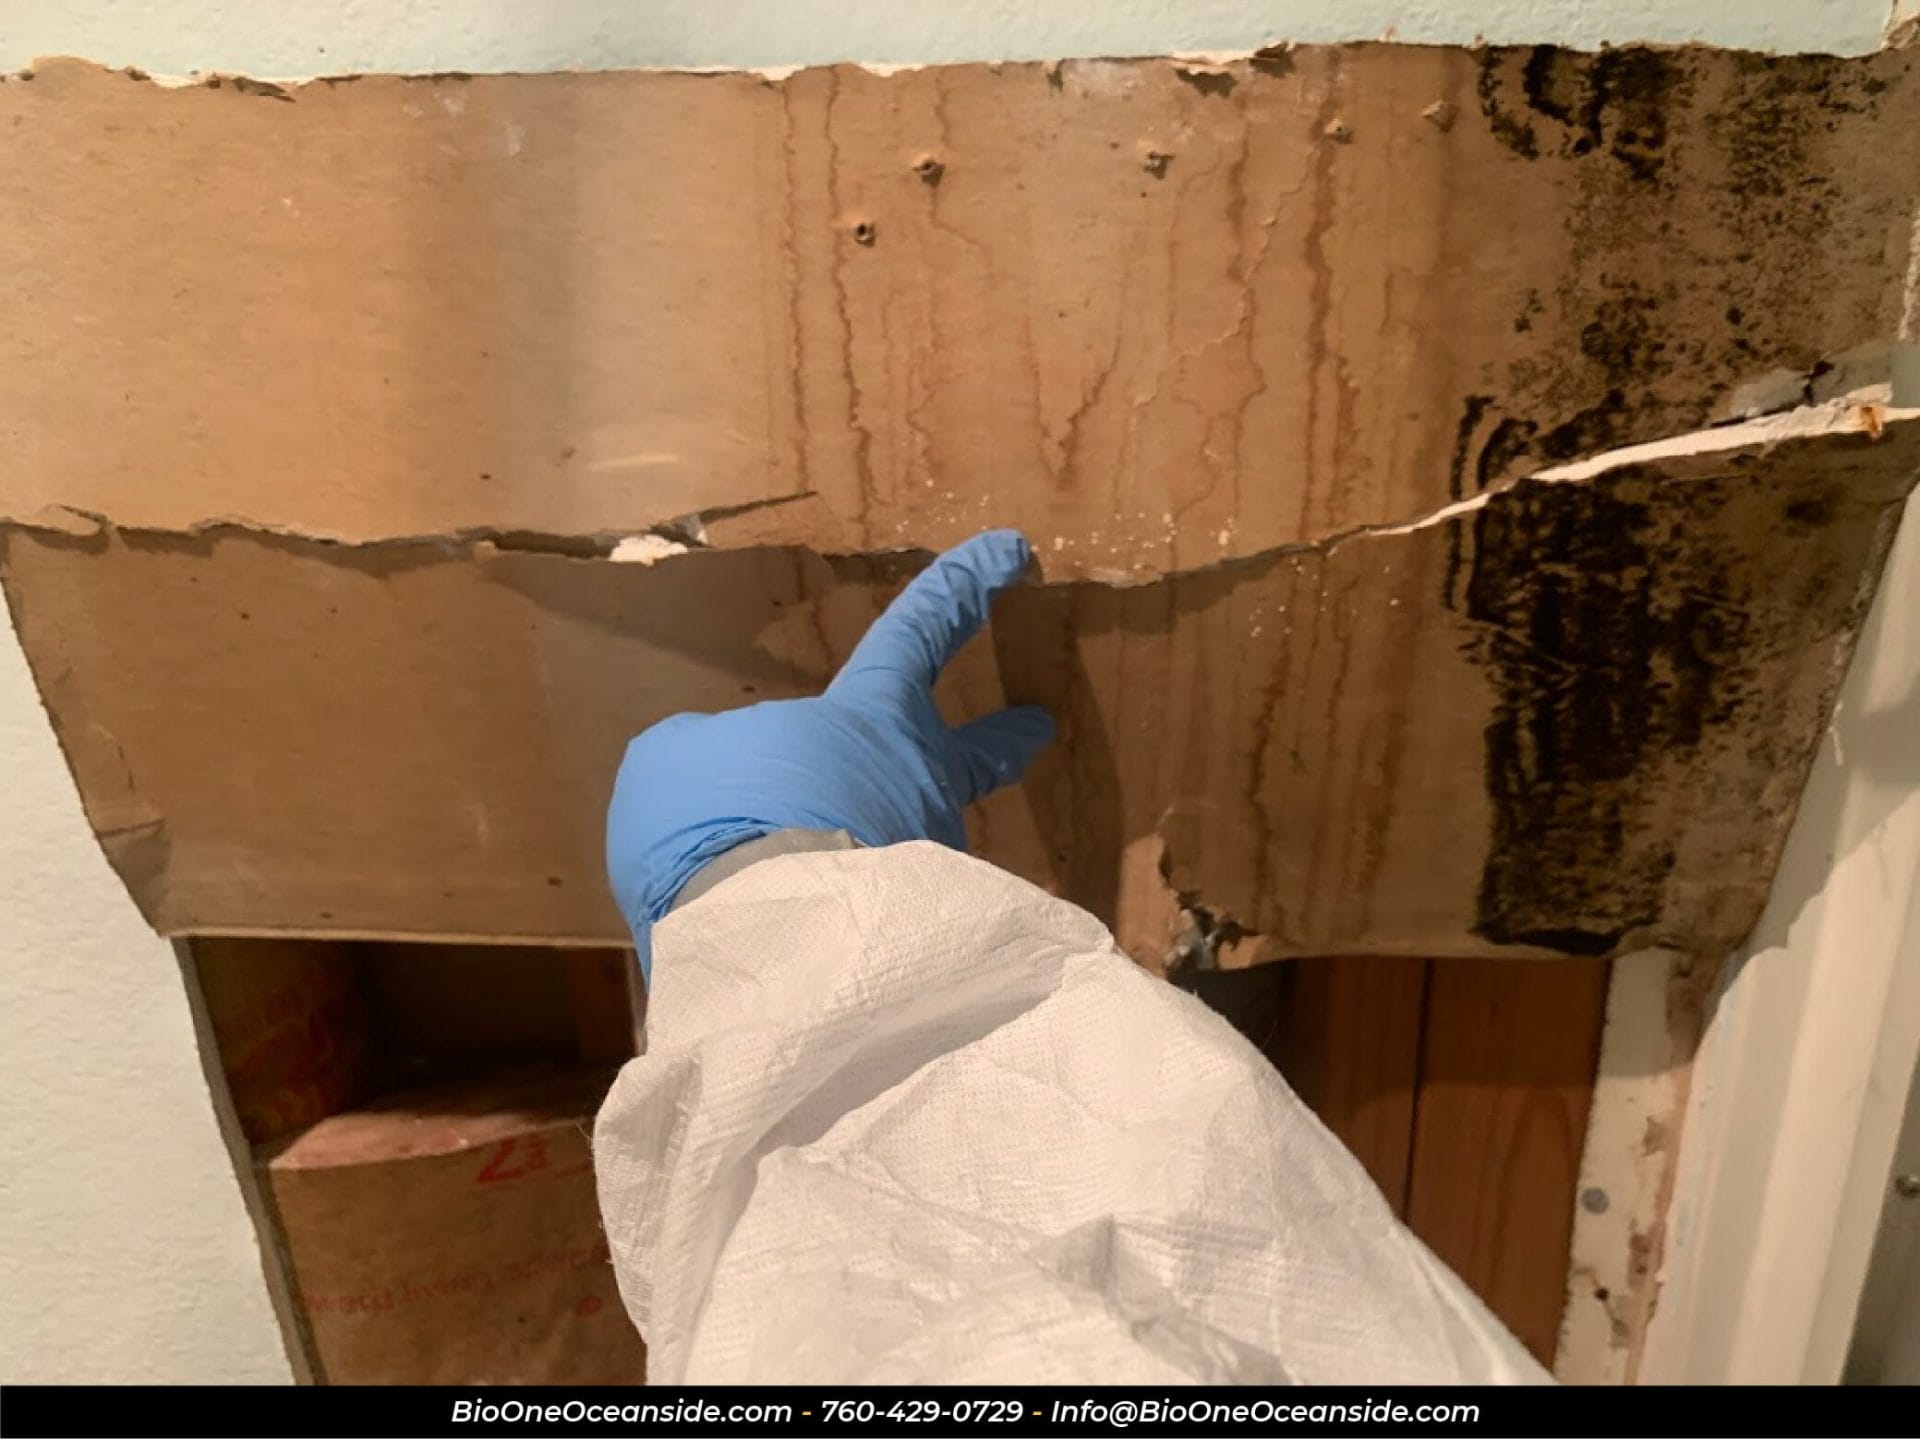 Drywall panel damaged by mold and water. Photo credit: Bio-One of Oceanside.